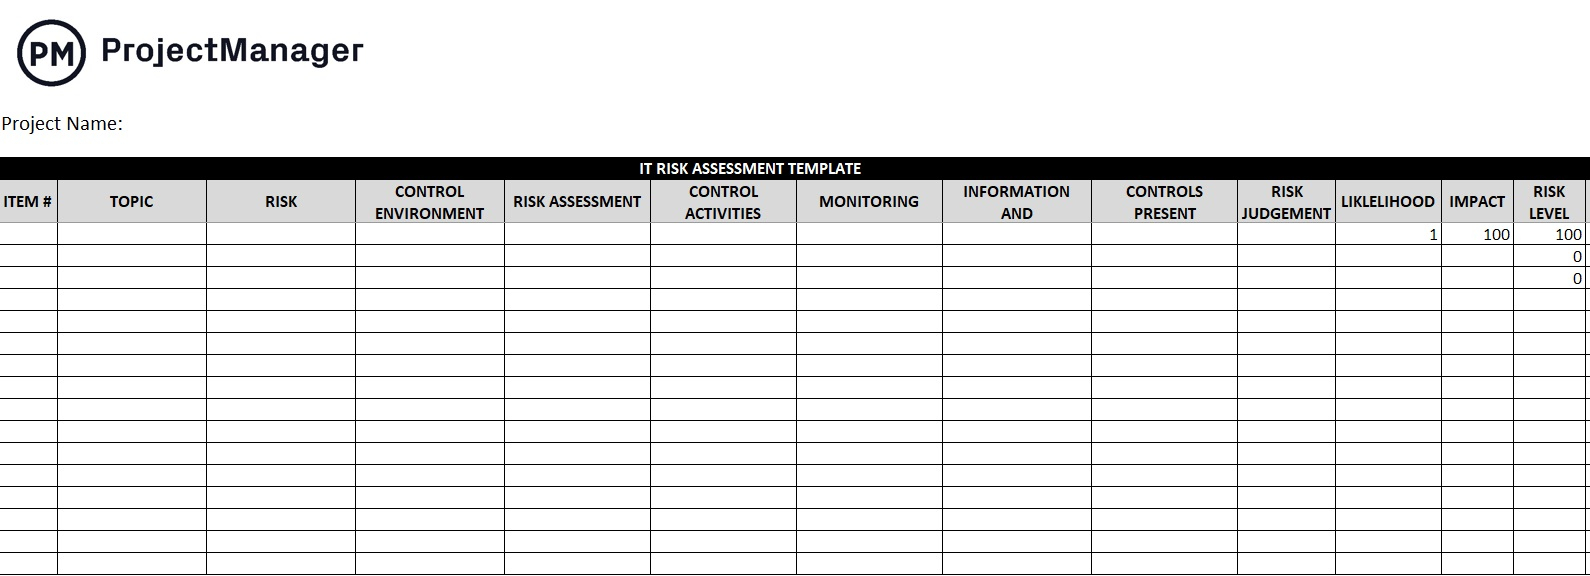 IT Risk Assessment Template - Free Excel Download - ProjectManager Throughout Risk Mitigation Report Template